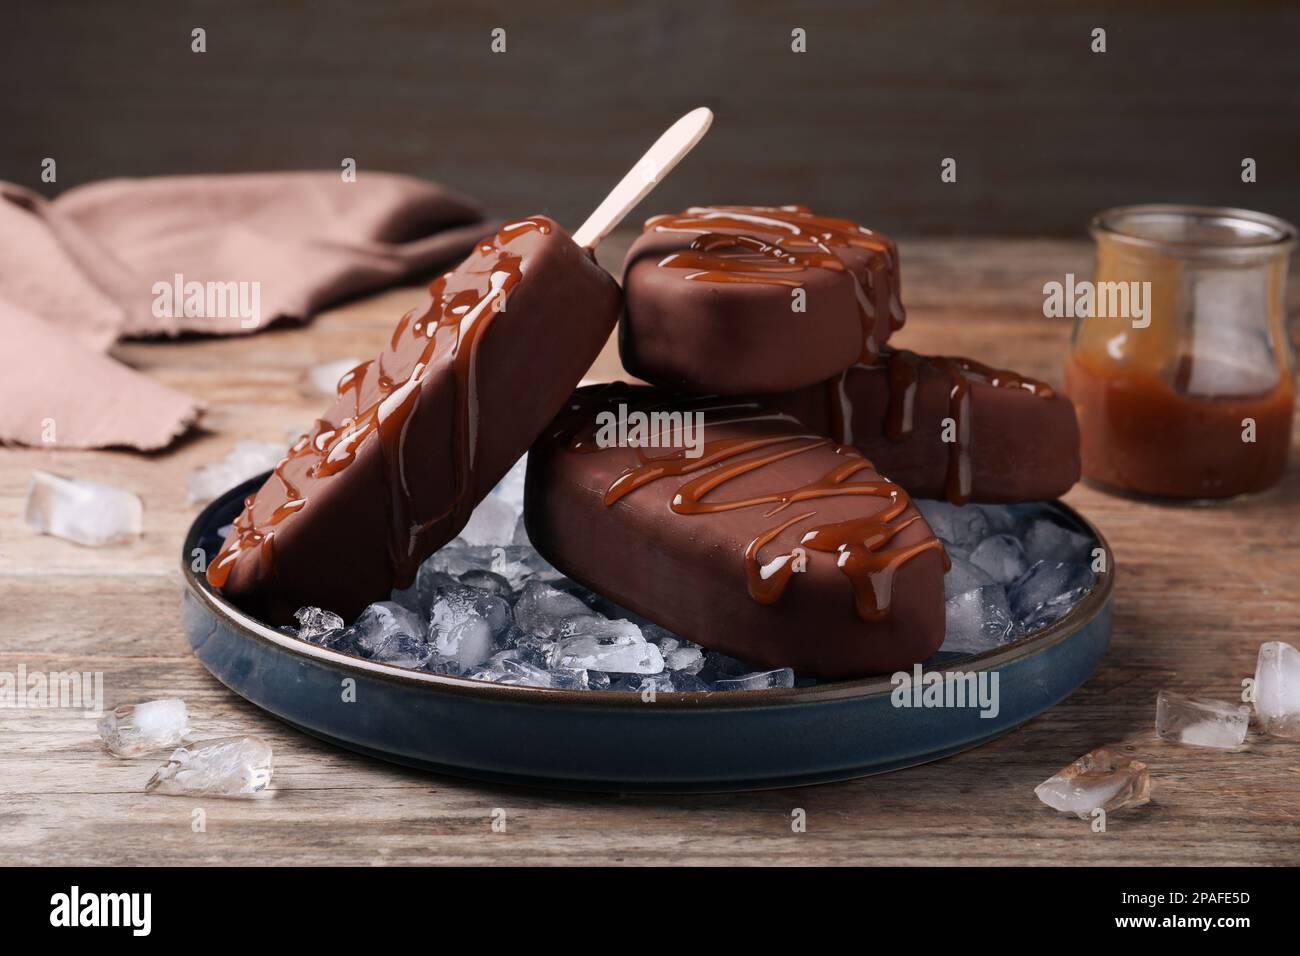 Delicious glazed ice cream bars and ice cubes on wooden table Stock Photo